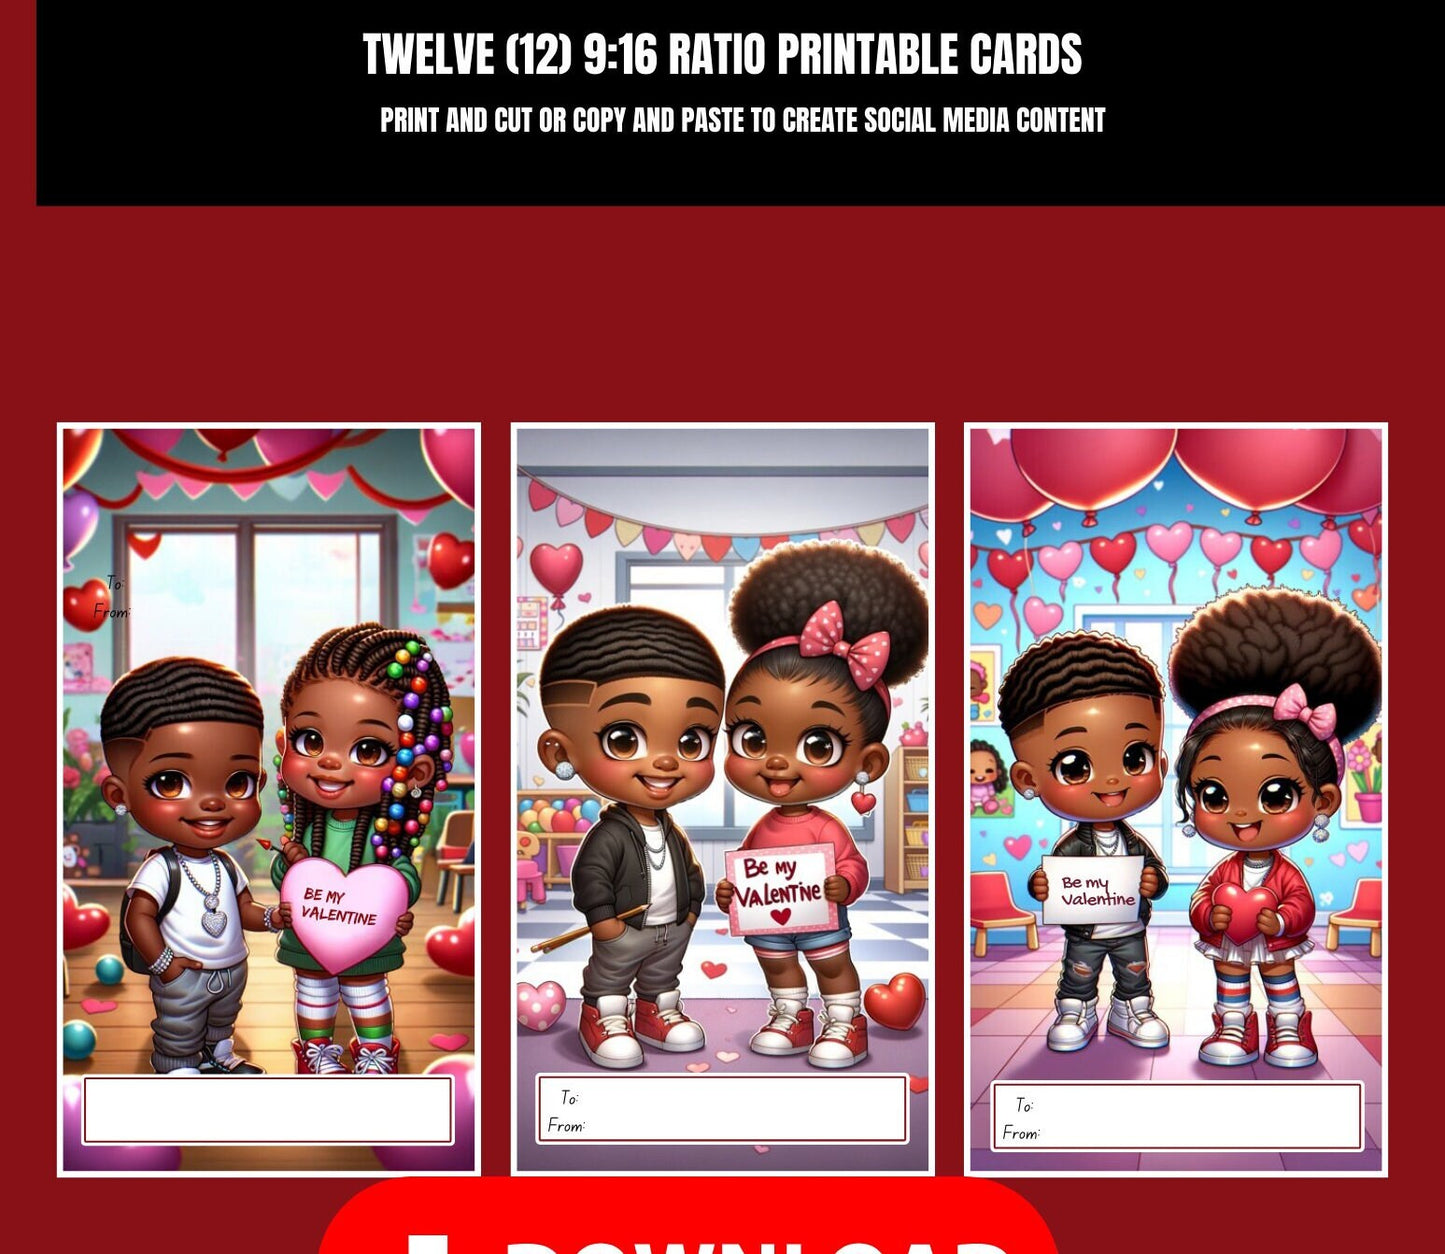 Be My Valentine’s? Pre-k Valentine Day!| Chibi Love in the Nursery. Cards|DFY| Culture Cards| African American Love